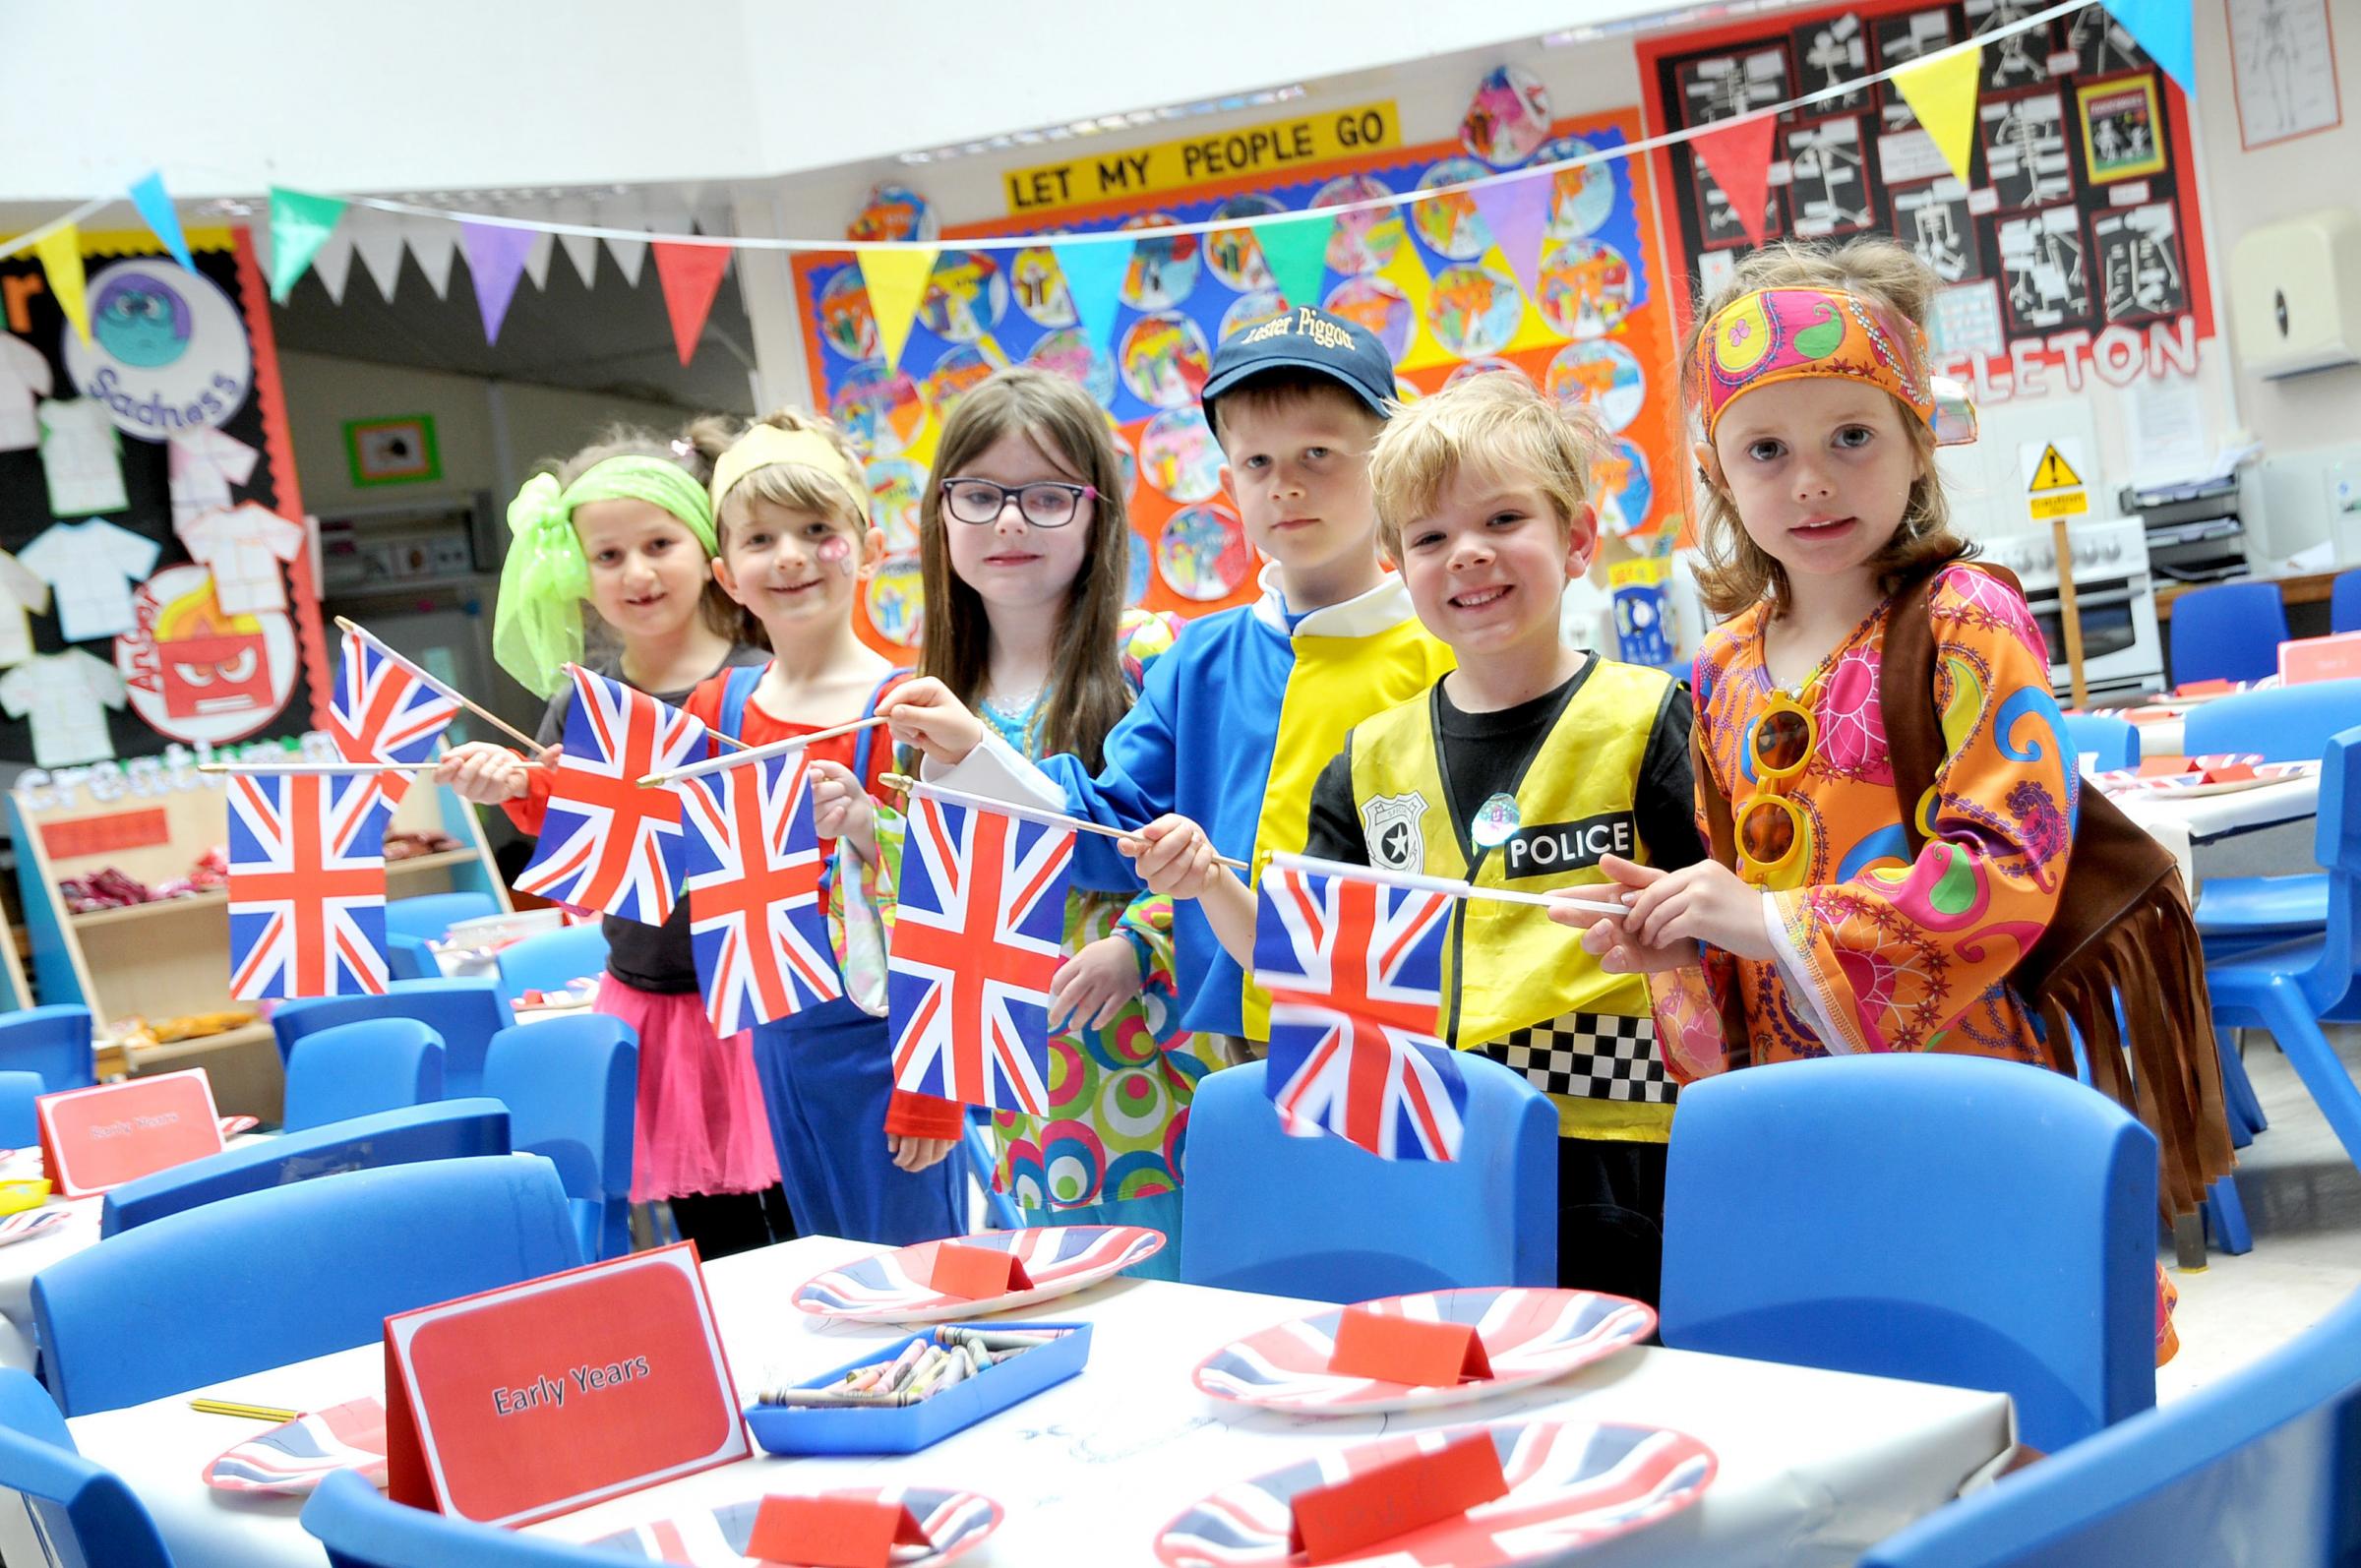 Queens jubilee celebrations at Gorse covert primary